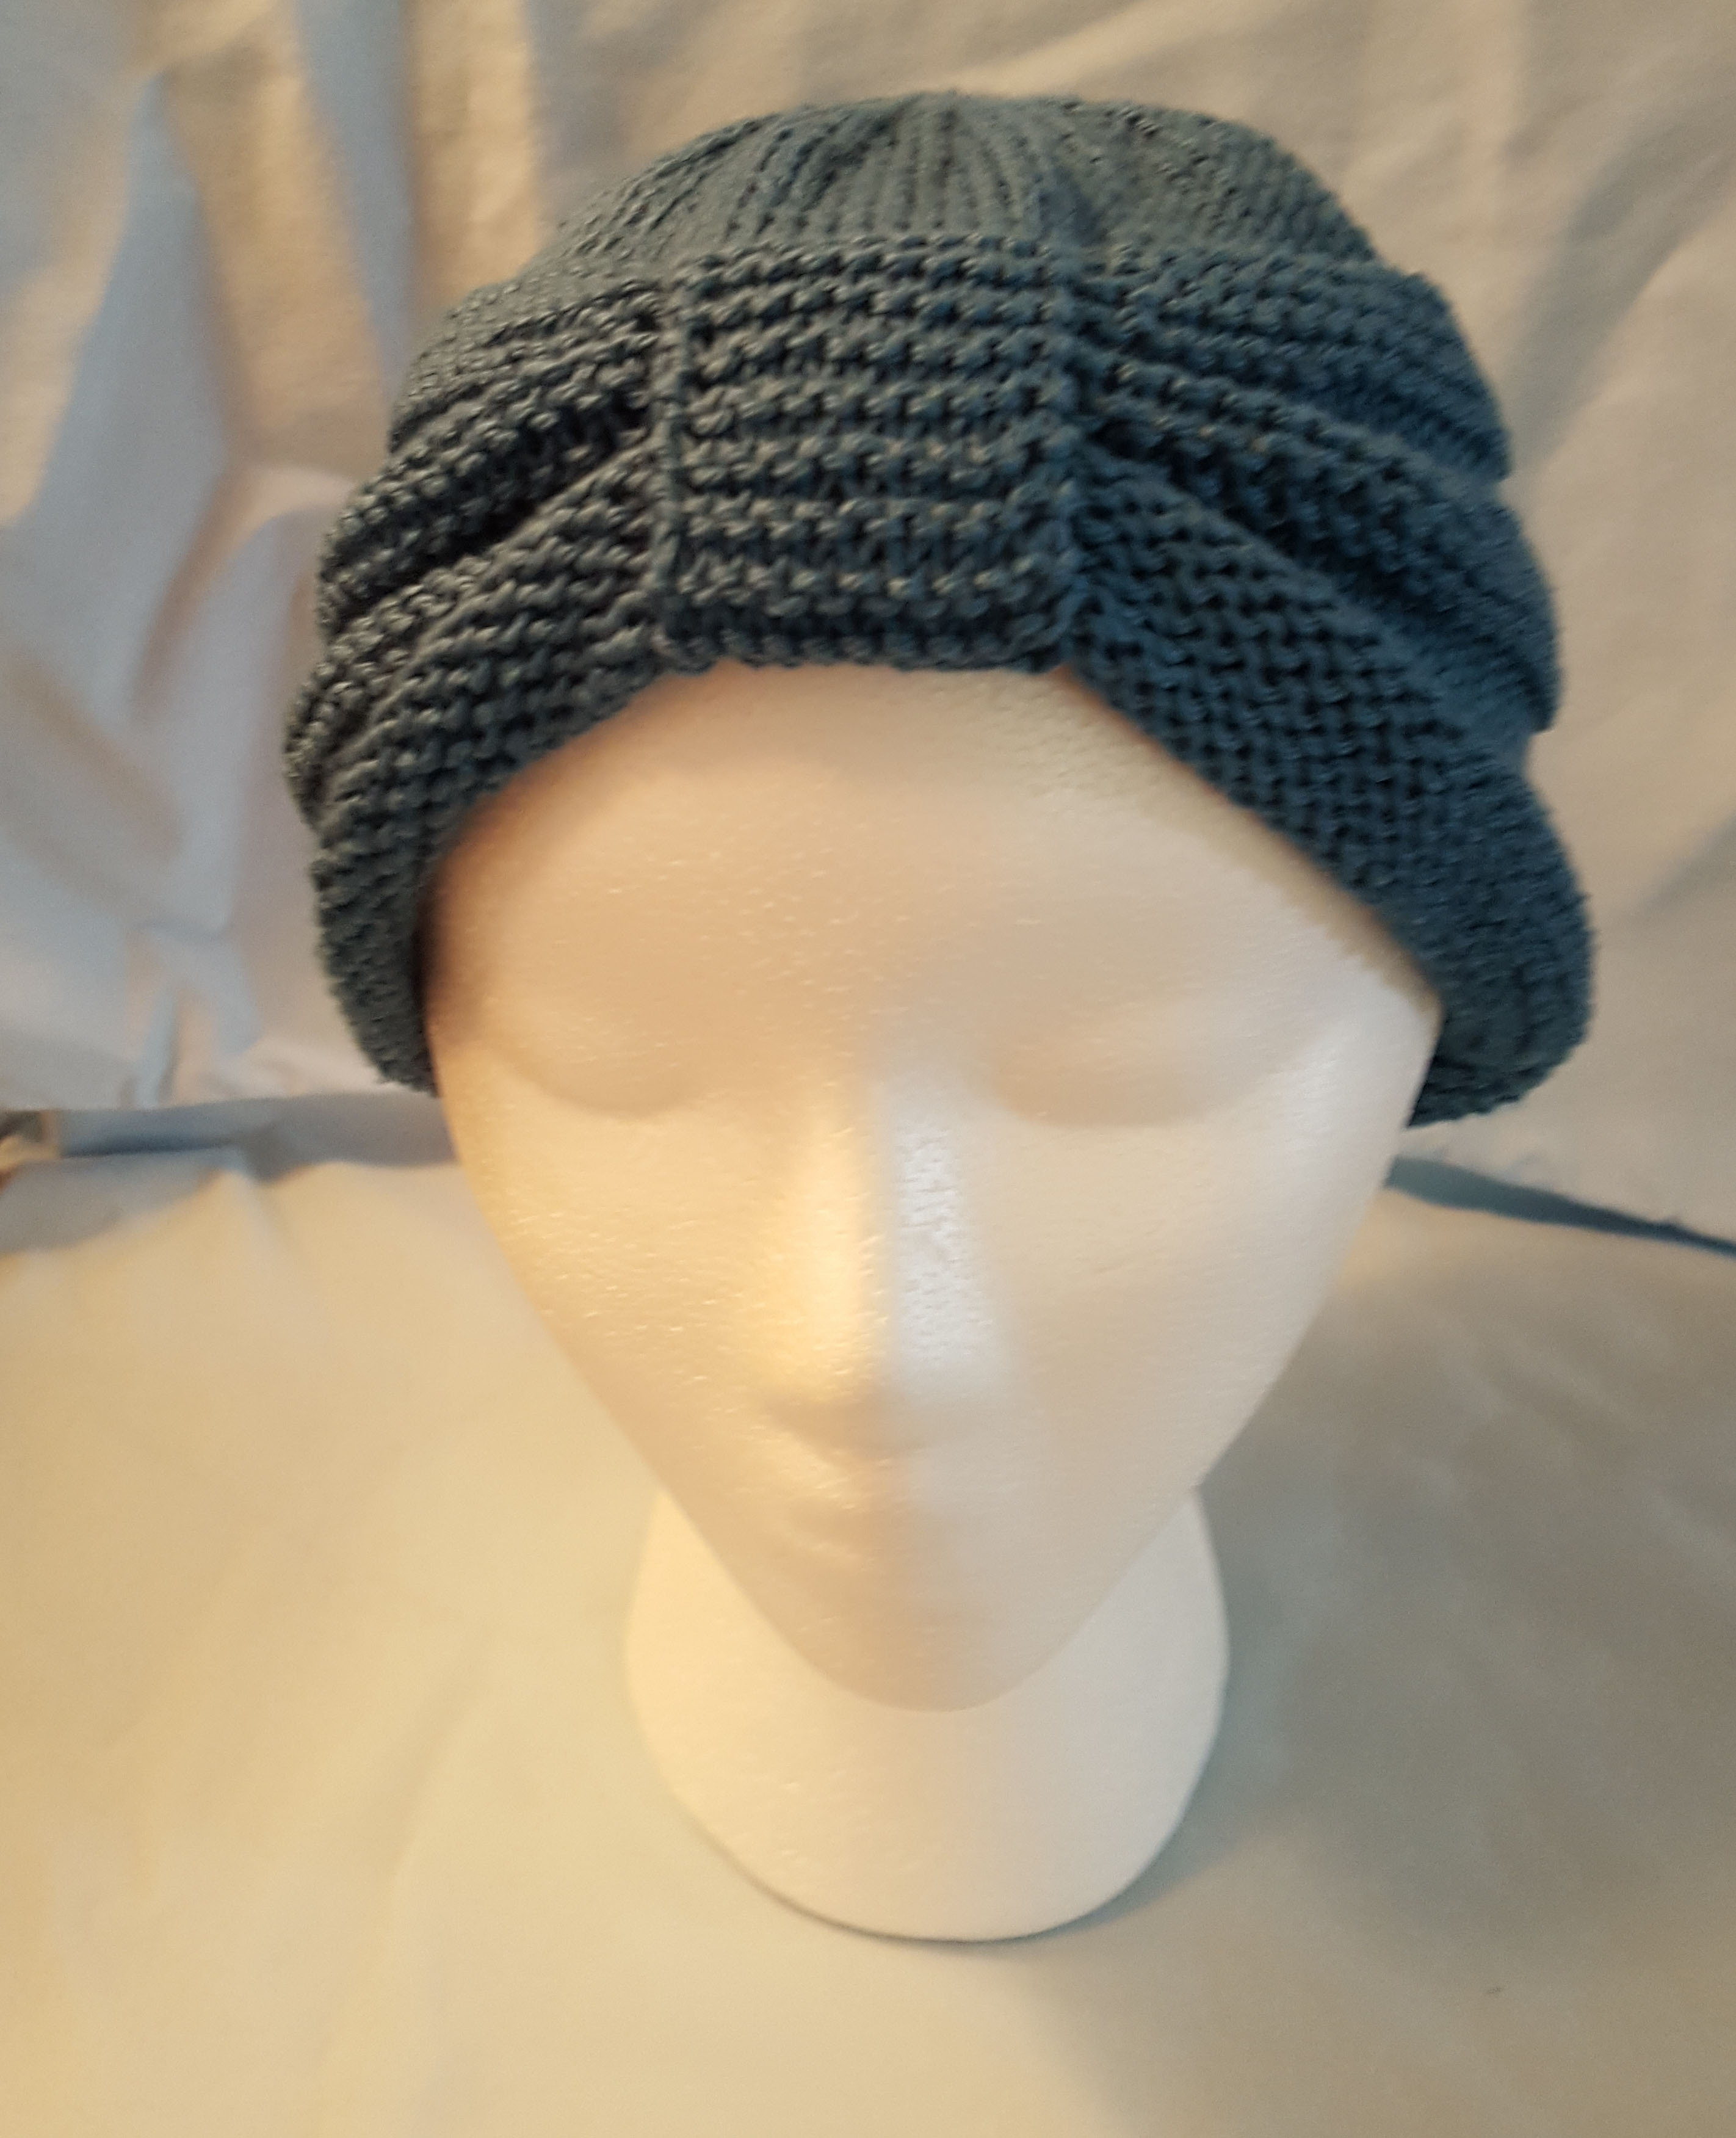 Ladies Knitted Hat Patterns New Pattern Knitted Turban Style Chemo Hat